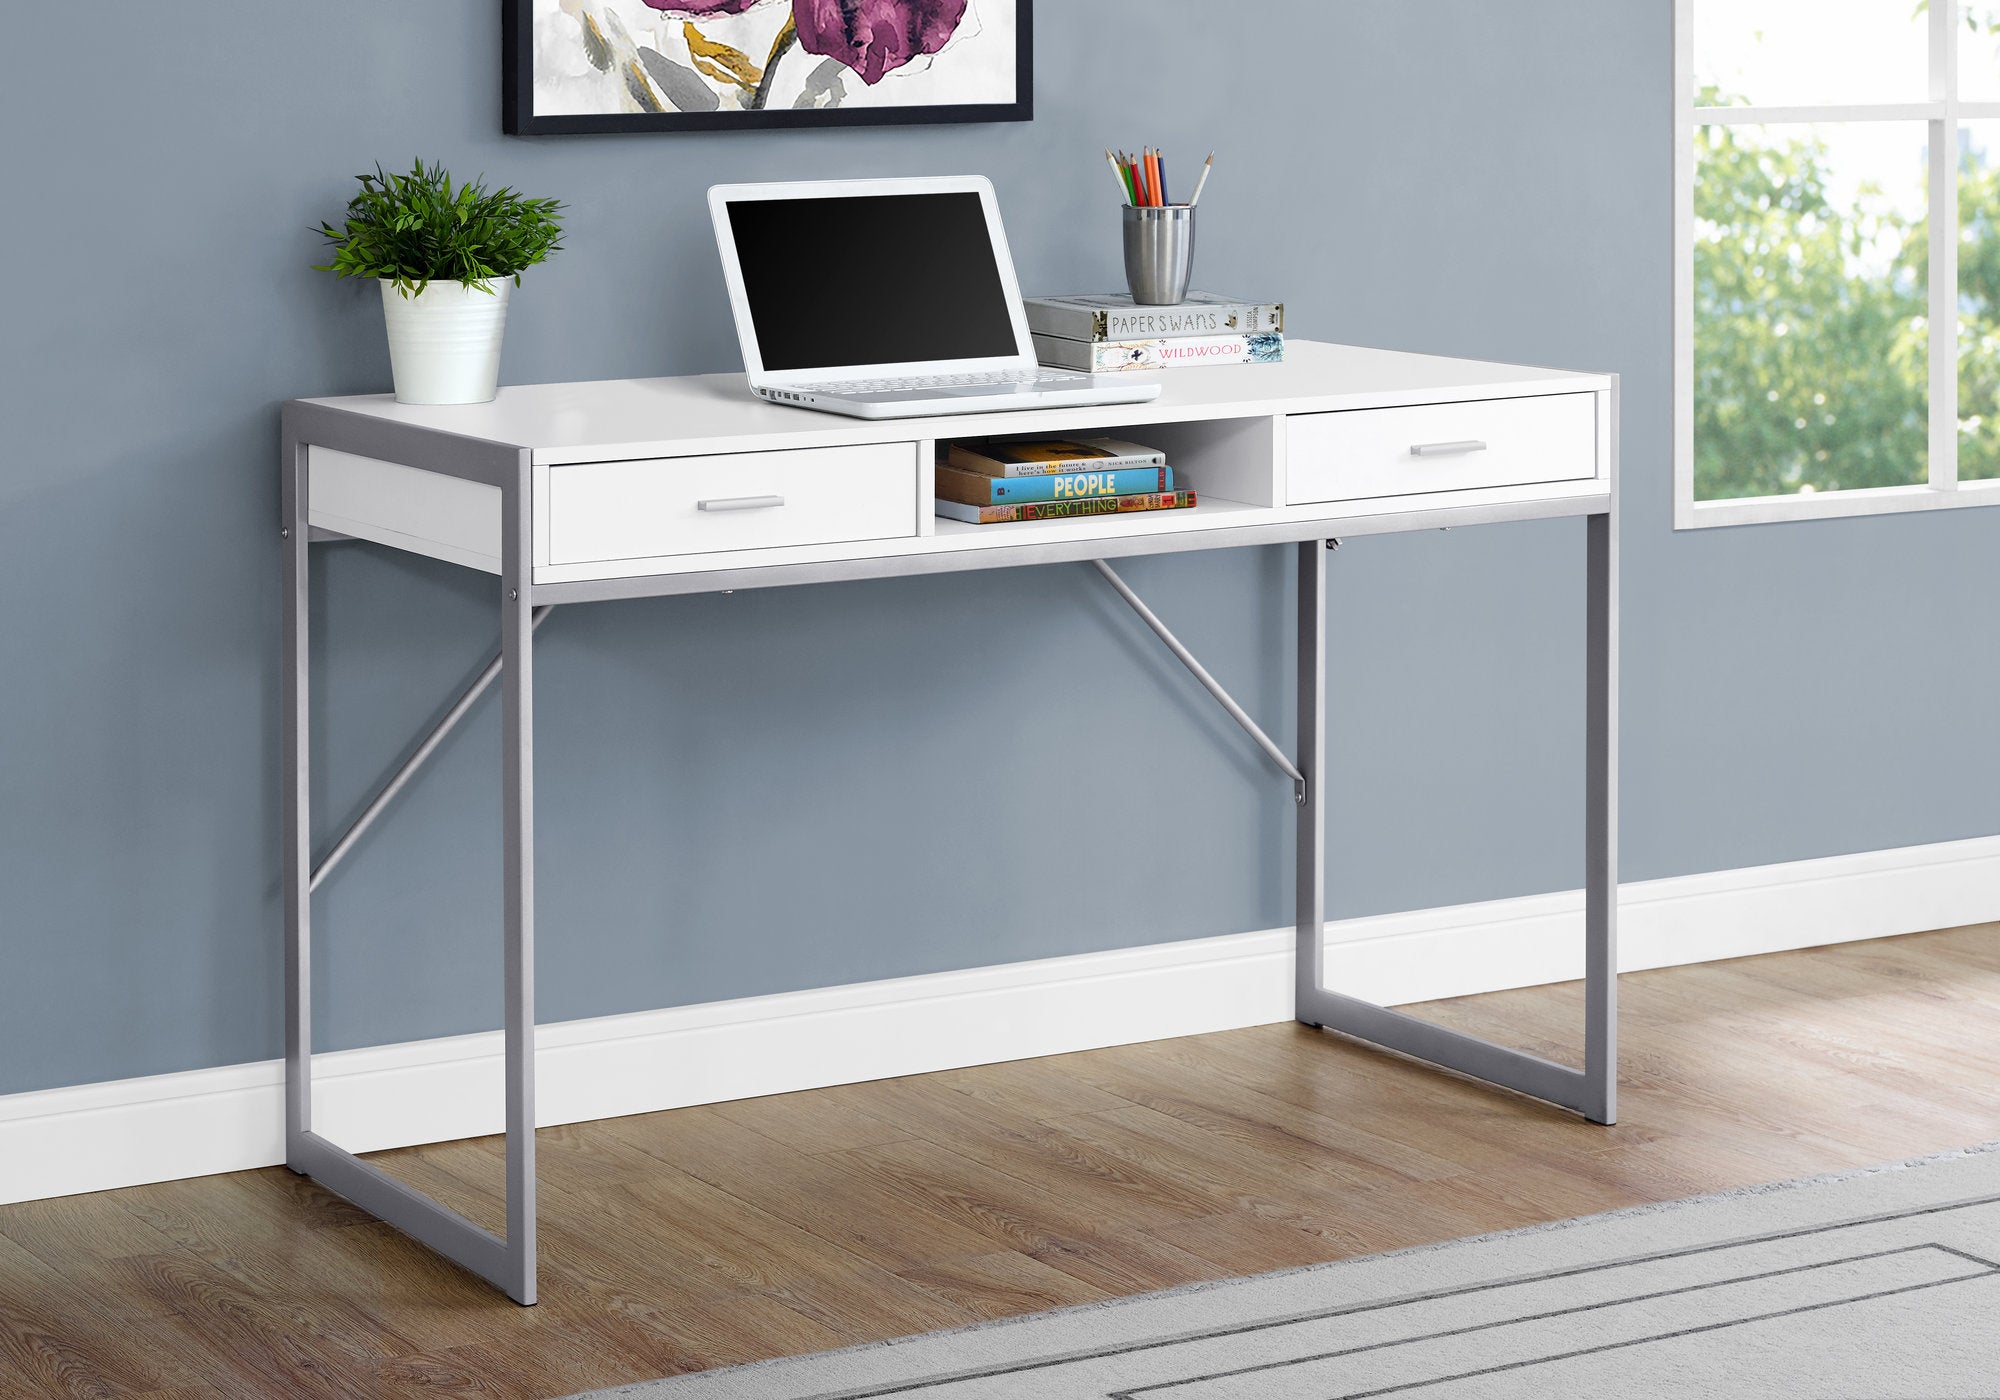 I 7364 - COMPUTER DESK - 48"L / WHITE / SILVER METAL BY MONARCH SPECIALTIES INC